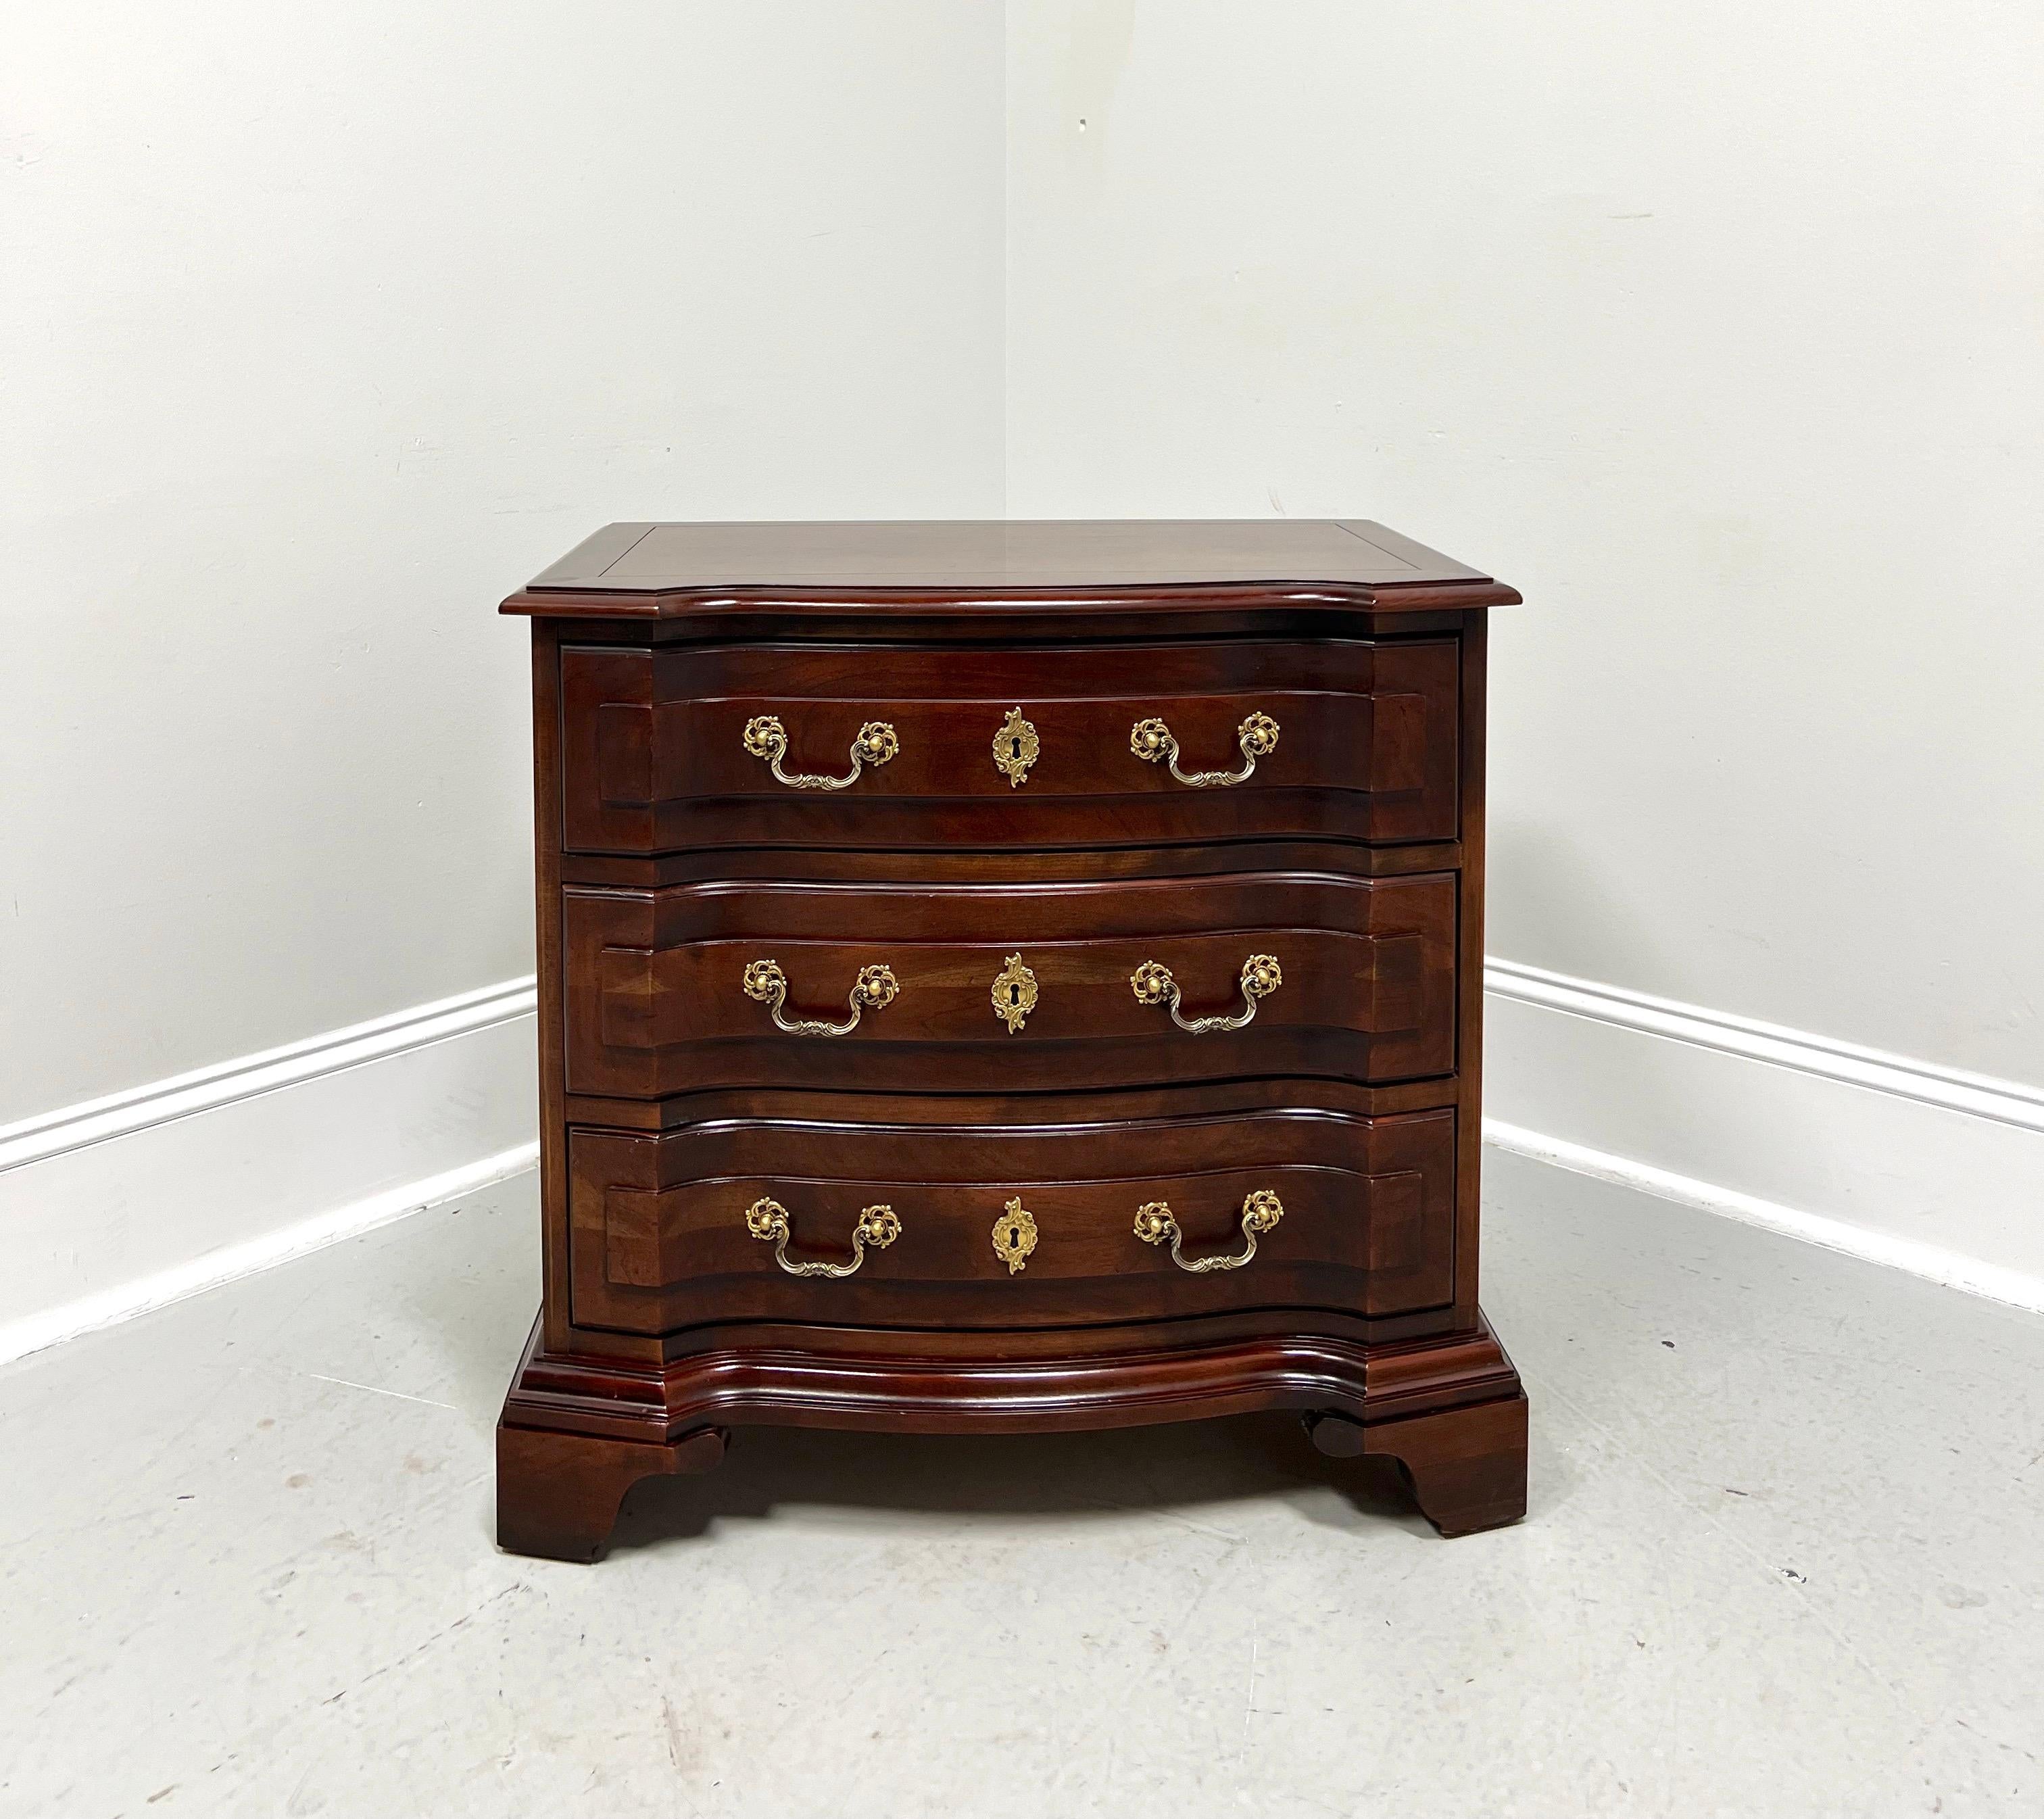 An Italian Provincial style nightstand by Century Furniture, from their Cardella Collection. Cherry wood with decorative brass hardware, block front, banded top with an ogee edge & squared corners, finished on all sides, and bracket feet. Features